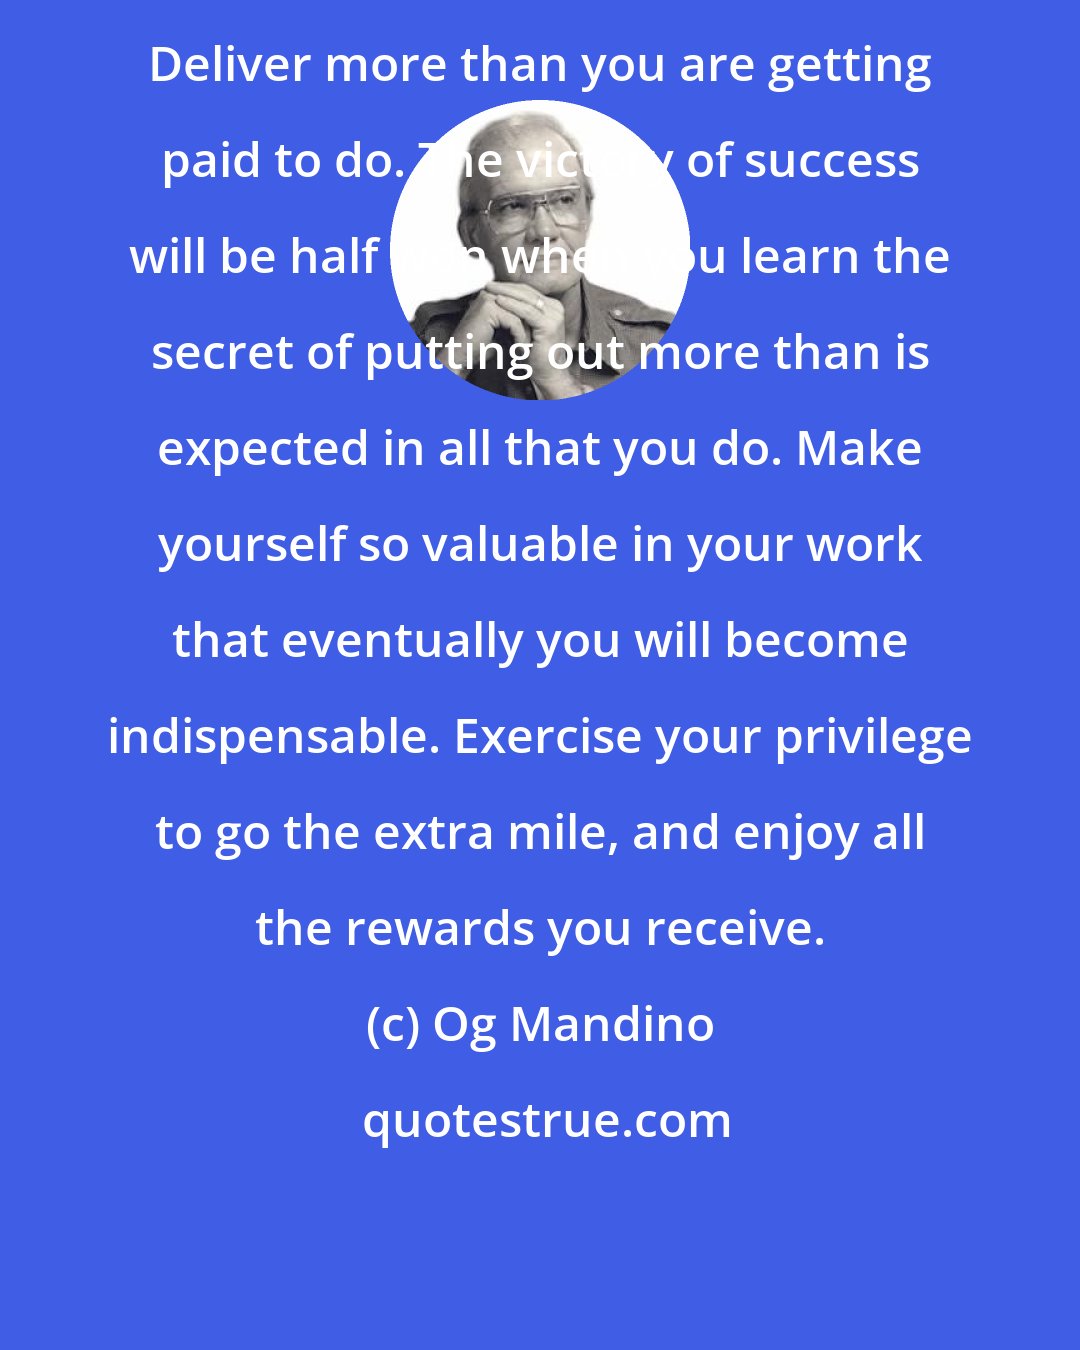 Og Mandino: Deliver more than you are getting paid to do. The victory of success will be half won when you learn the secret of putting out more than is expected in all that you do. Make yourself so valuable in your work that eventually you will become indispensable. Exercise your privilege to go the extra mile, and enjoy all the rewards you receive.